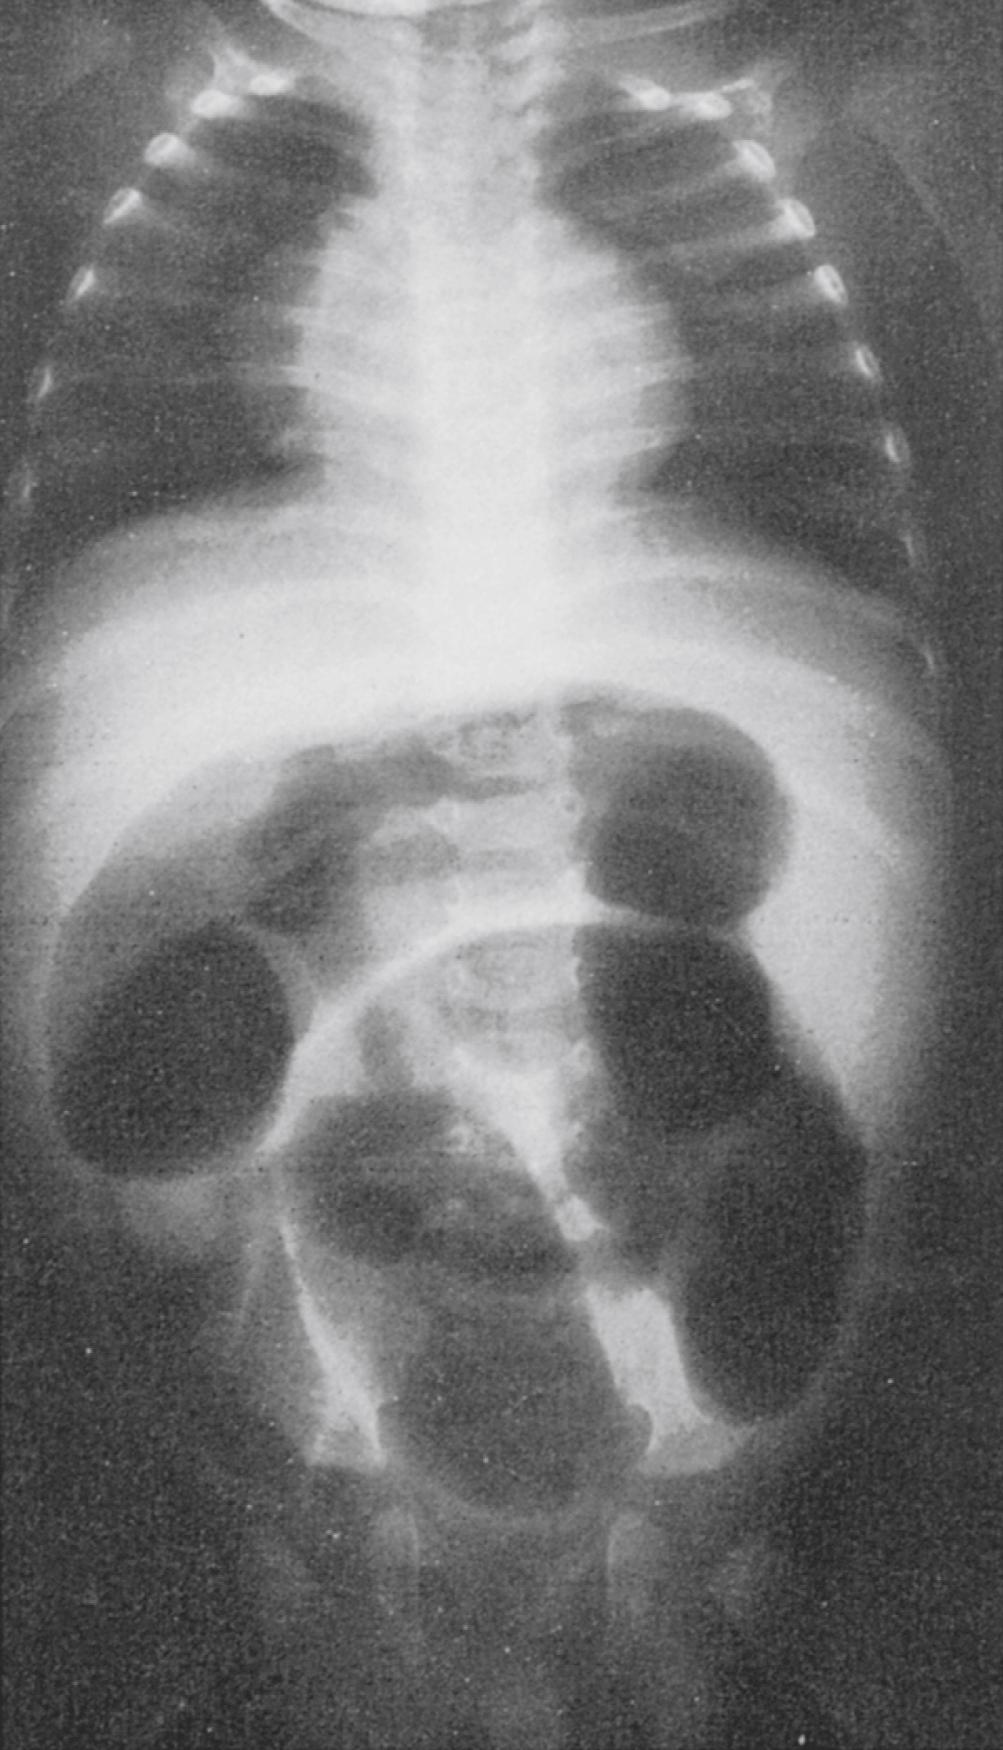 Fig. 15.8, Diffusely dilated bowel loops in intestinal obstruction.